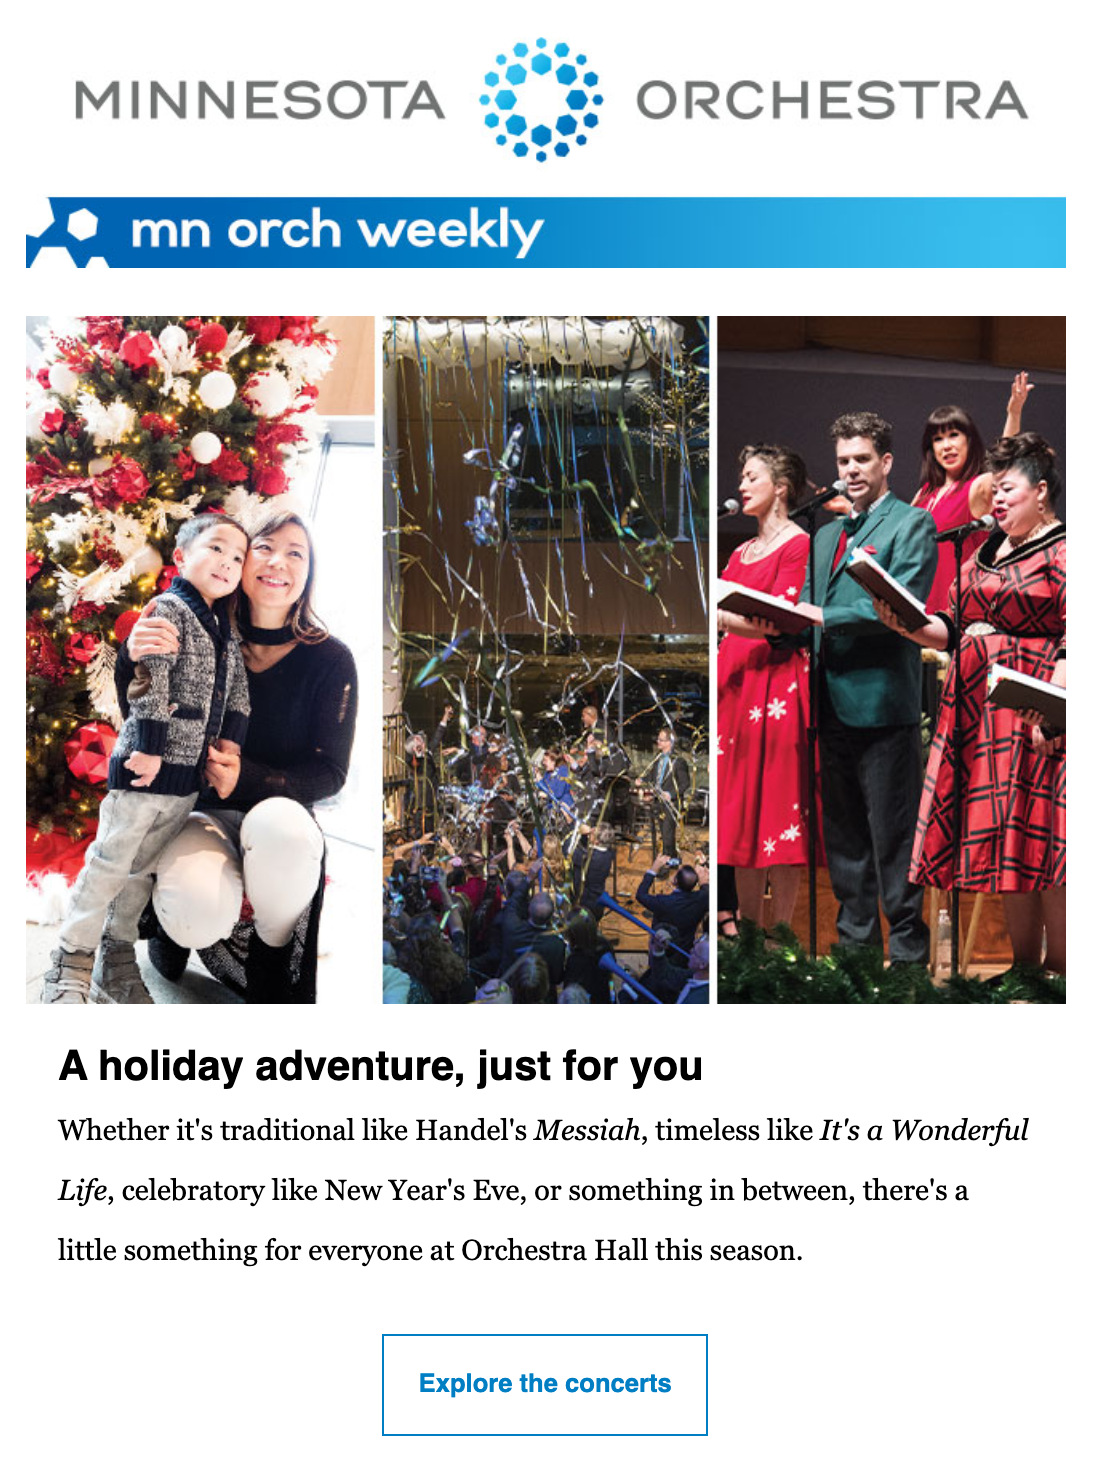 Example of Minnesota Orchestra email featuring holiday photos of their performances